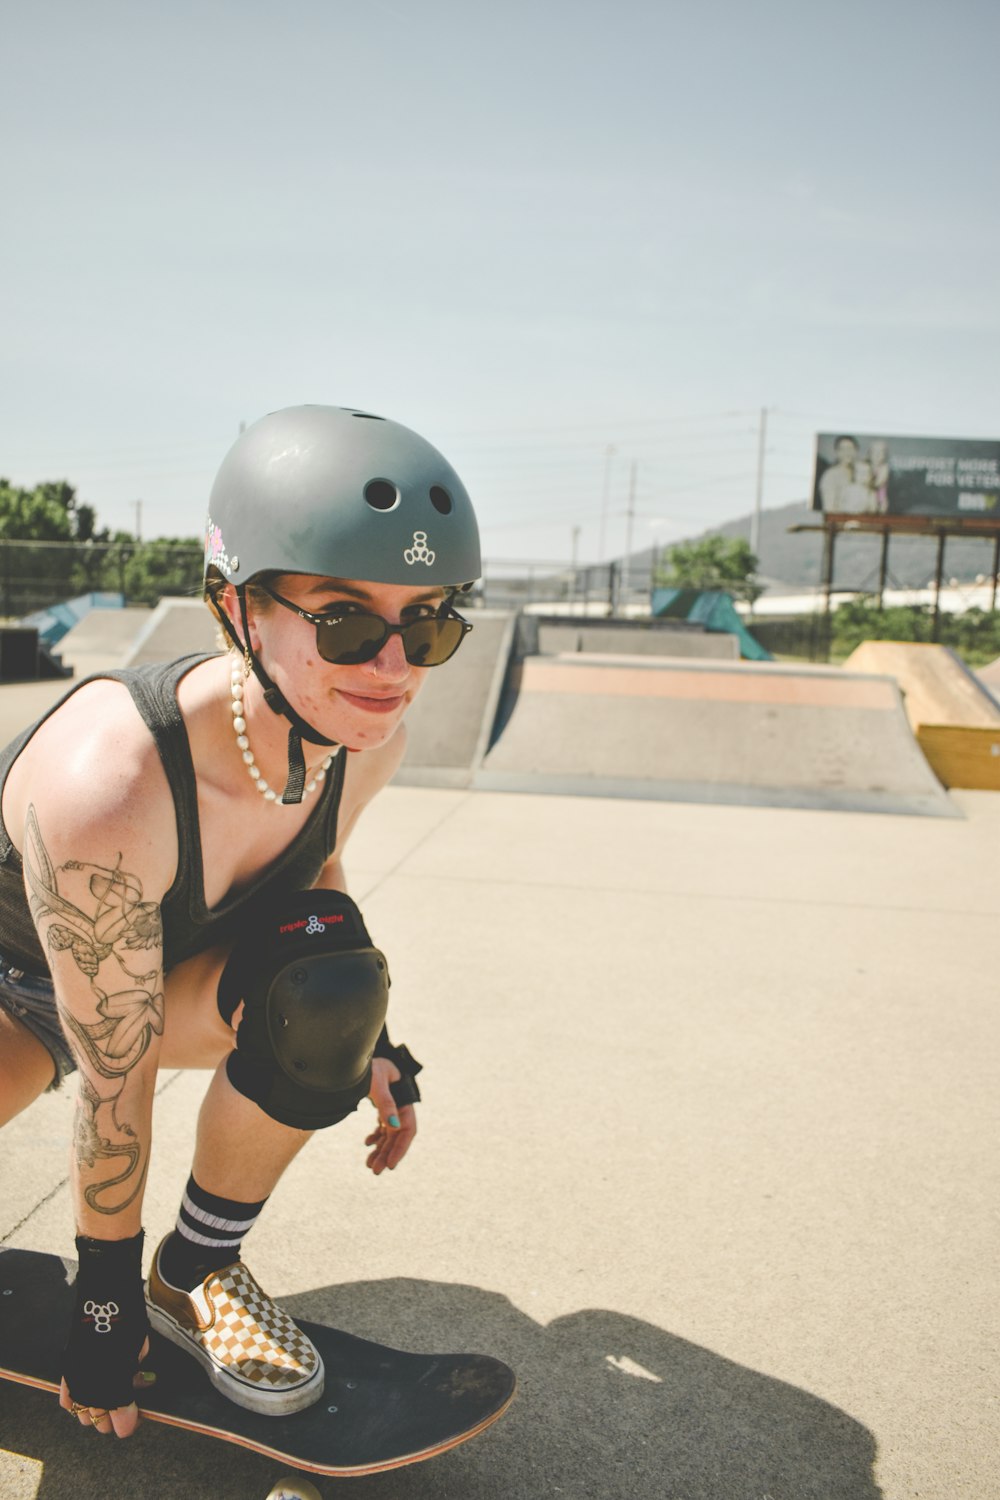 a person wearing a helmet and roller skates